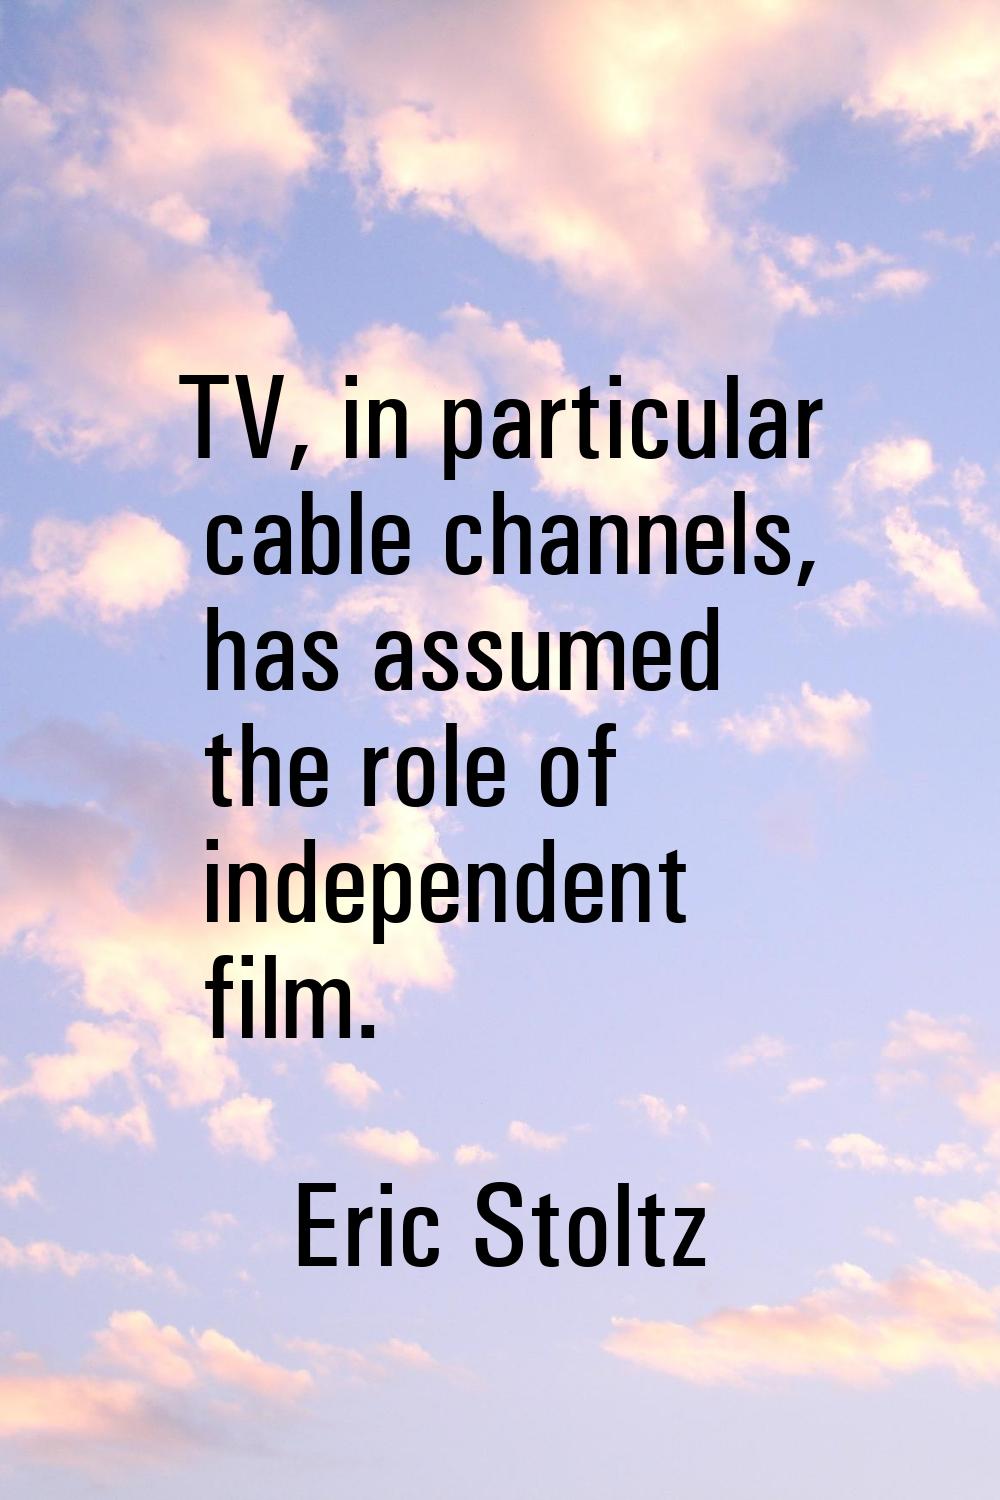 TV, in particular cable channels, has assumed the role of independent film.